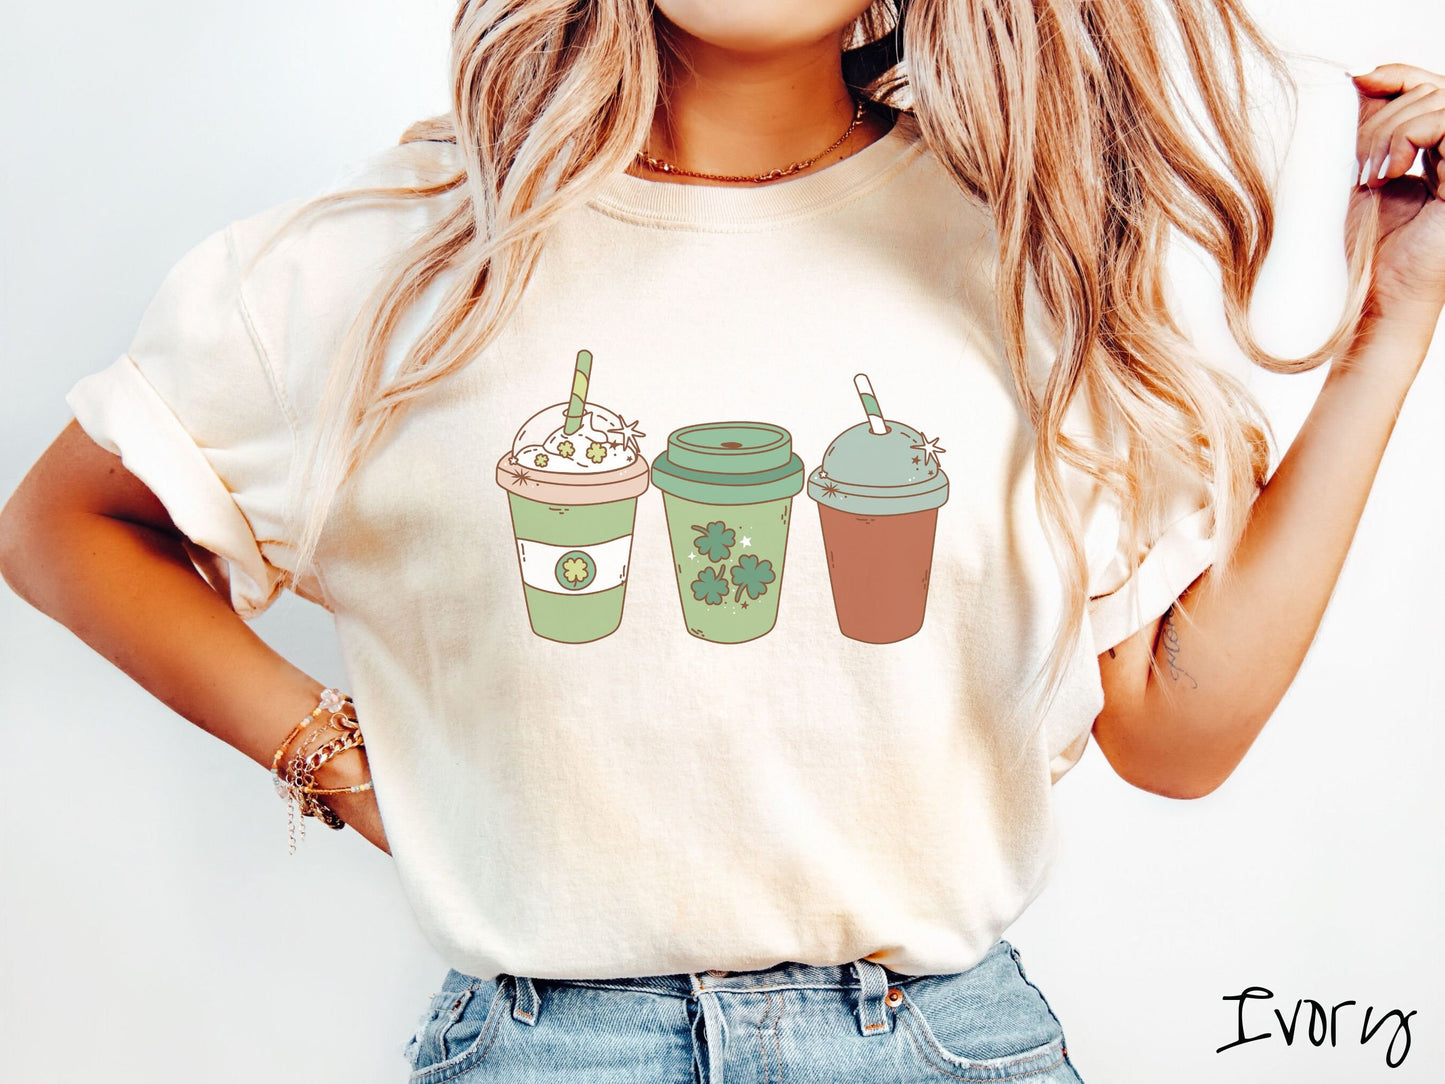 A woman wearing a vintage, ivory colored shirt with three coffee cups, one is white and green with a clear lid showing whipped cream topping with green clover sprinkles, another green cup with green clovers, and the third is brown with a green lid.